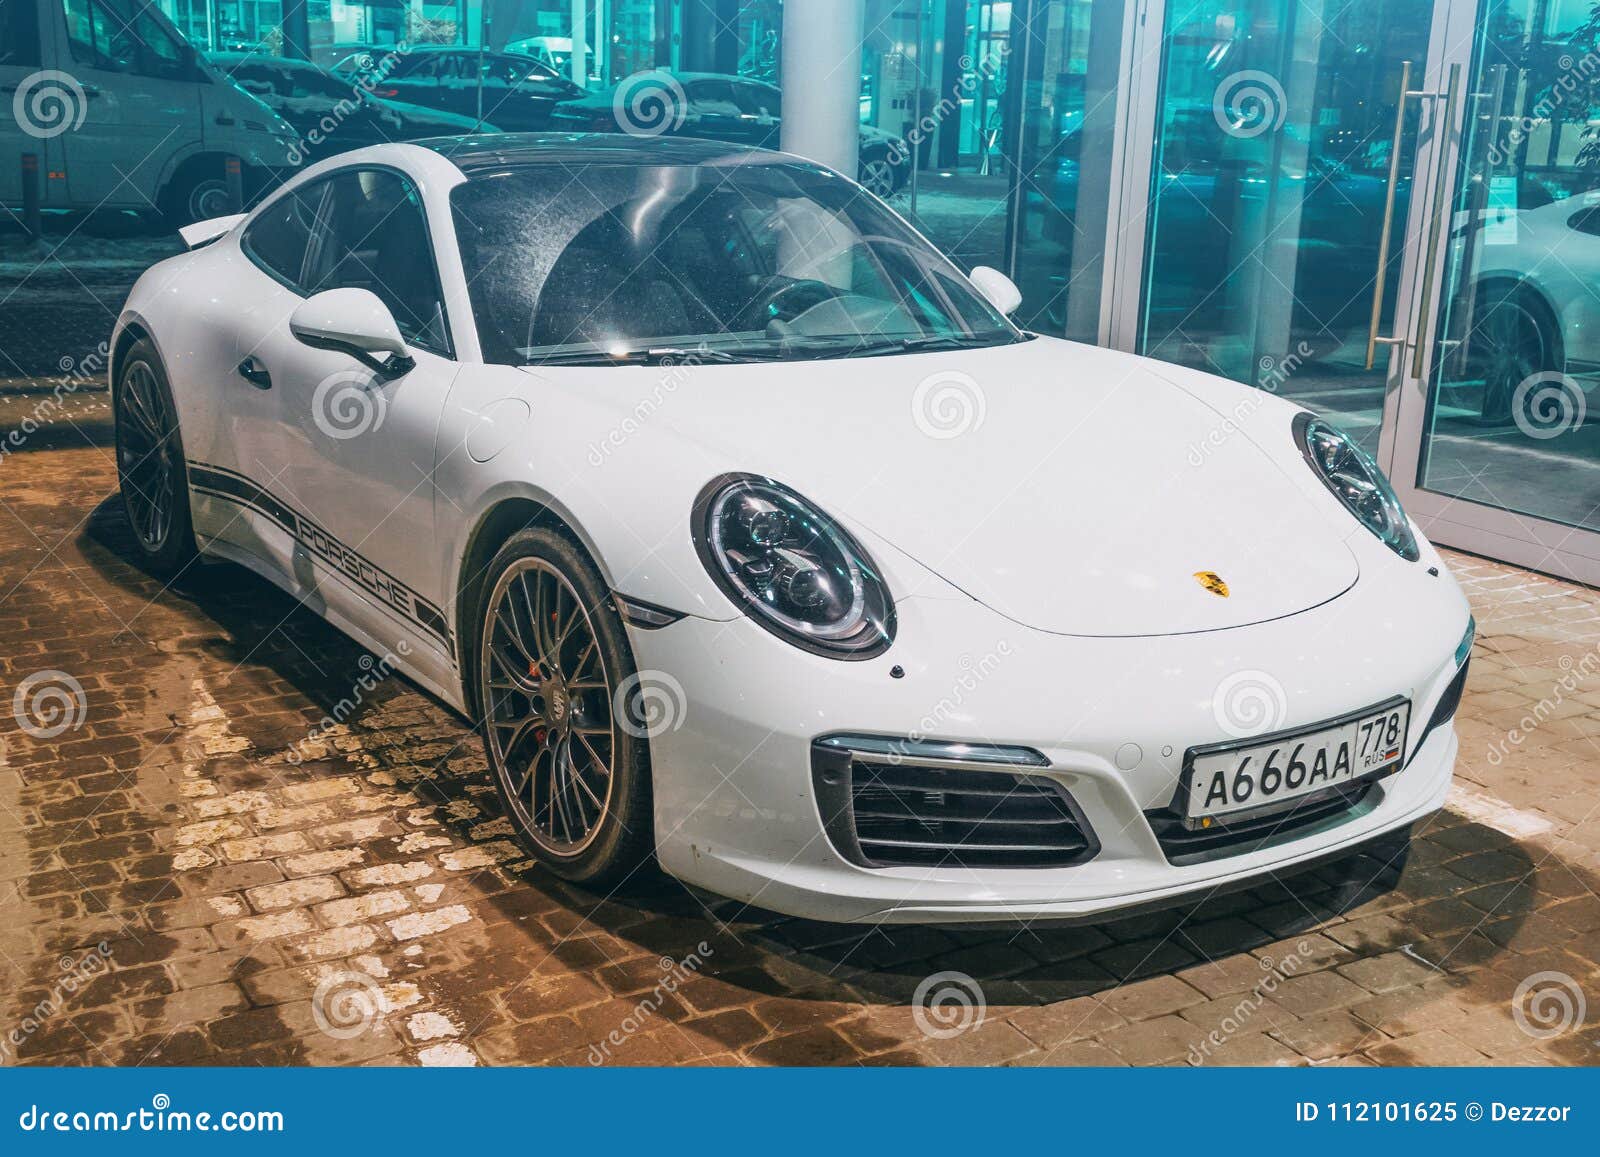 Porsche White 911 Carrera 4s. Russia, Saint-Petersburg. 02 March 2018.  Editorial Image - Image of performance, industry: 112101625